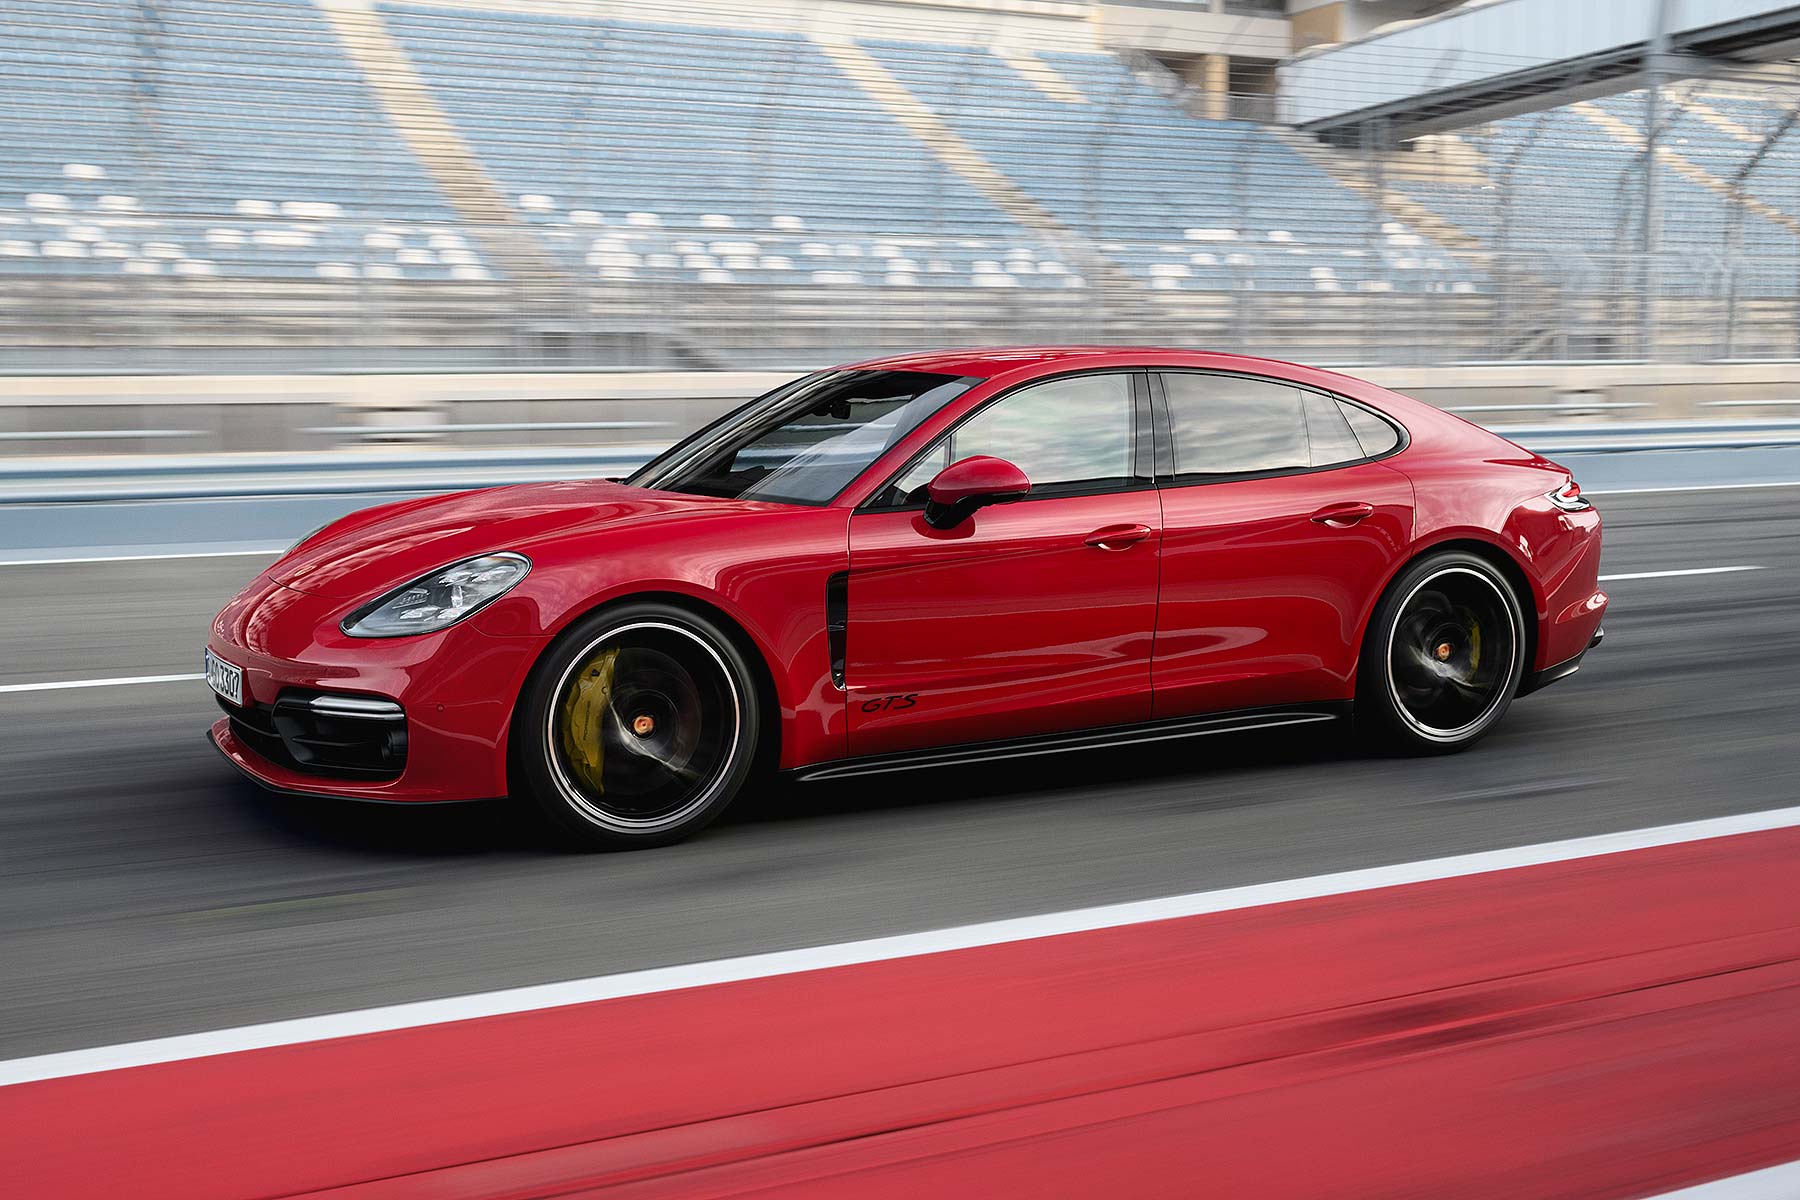 2019 Porsche Panamera GTS the 460hp V8 express with a